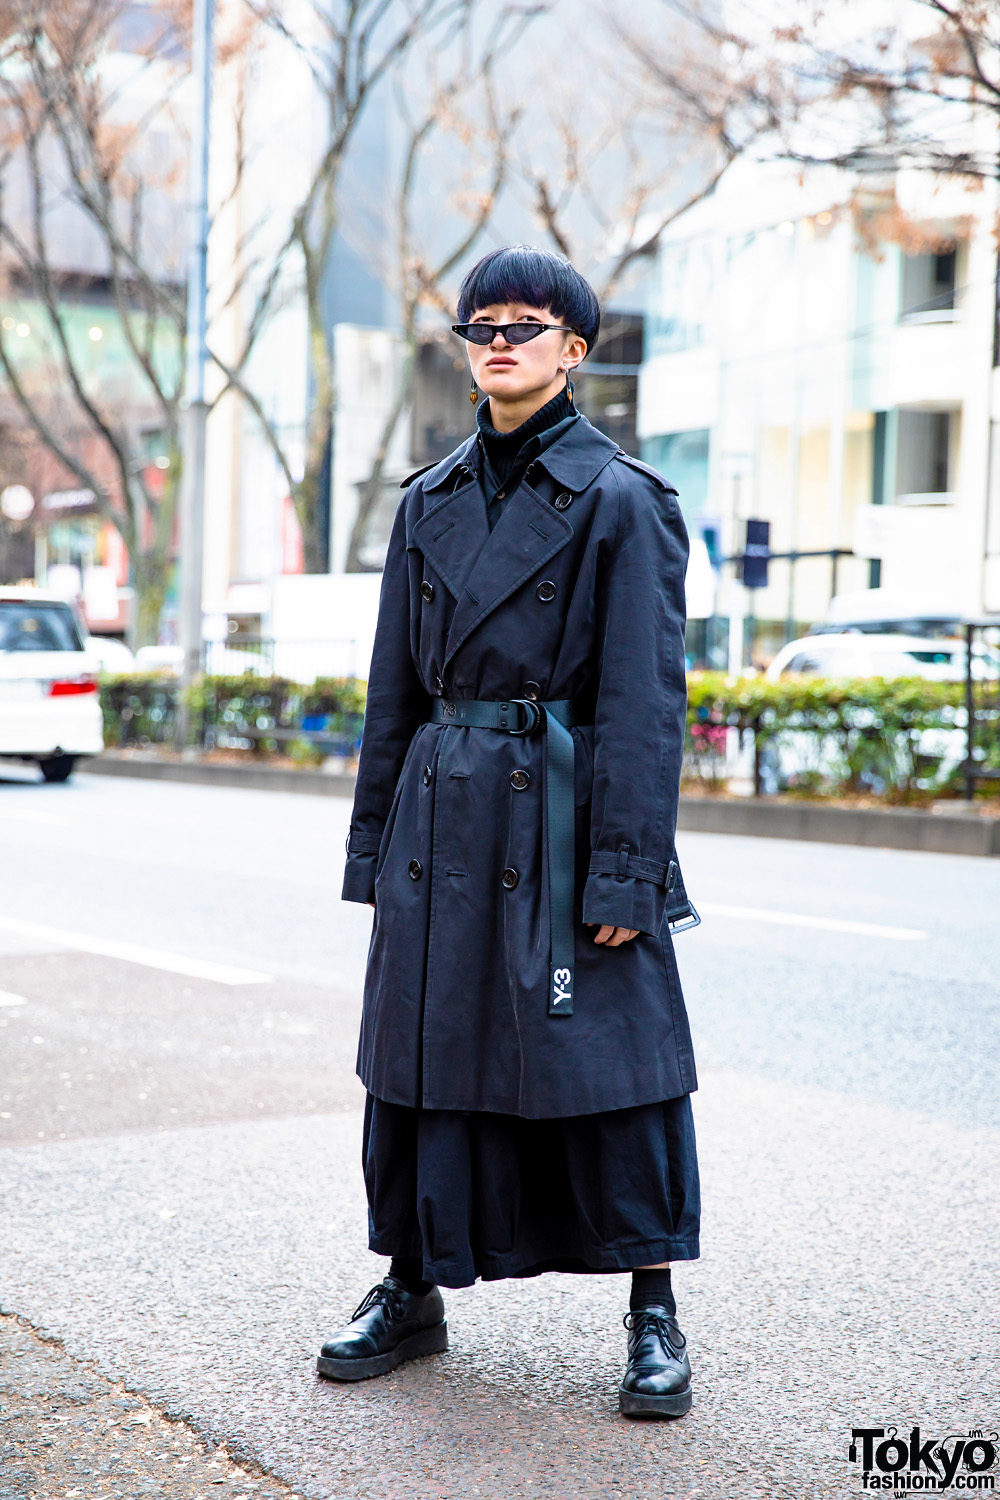 burberry trench coat street style